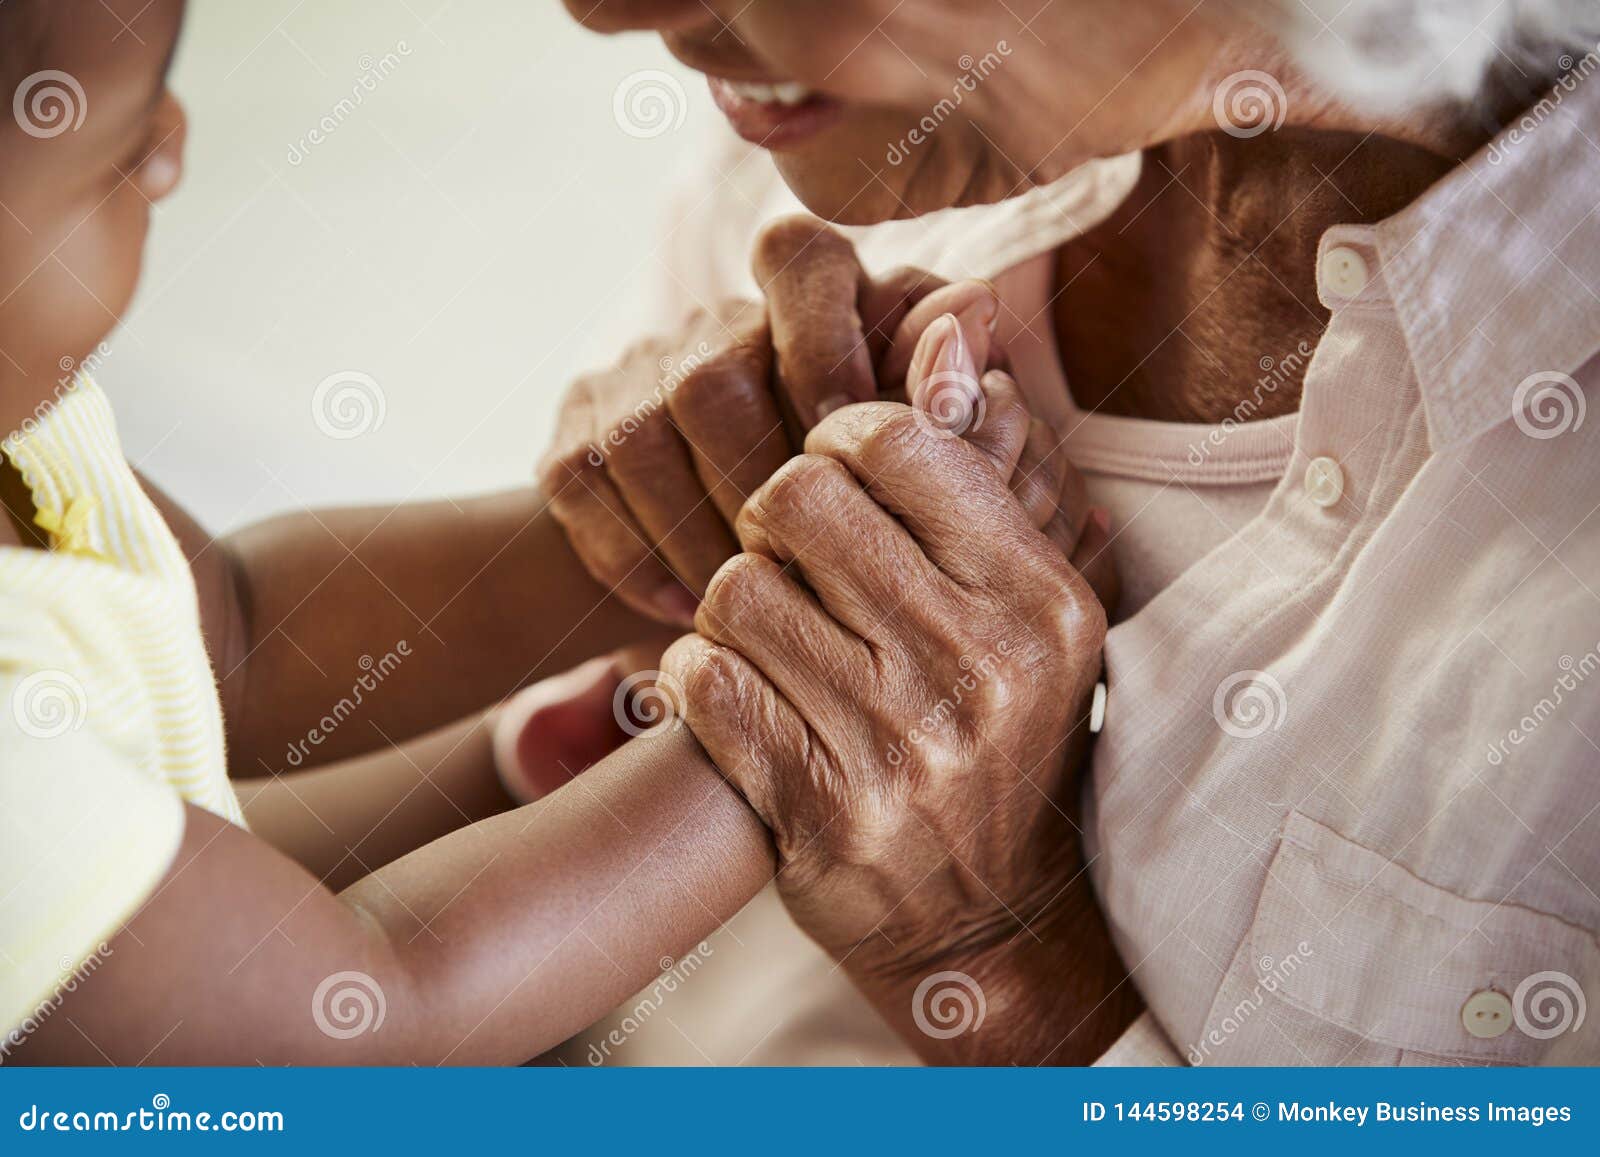 close up of grandmother holding hands with baby granddaughter playing game together